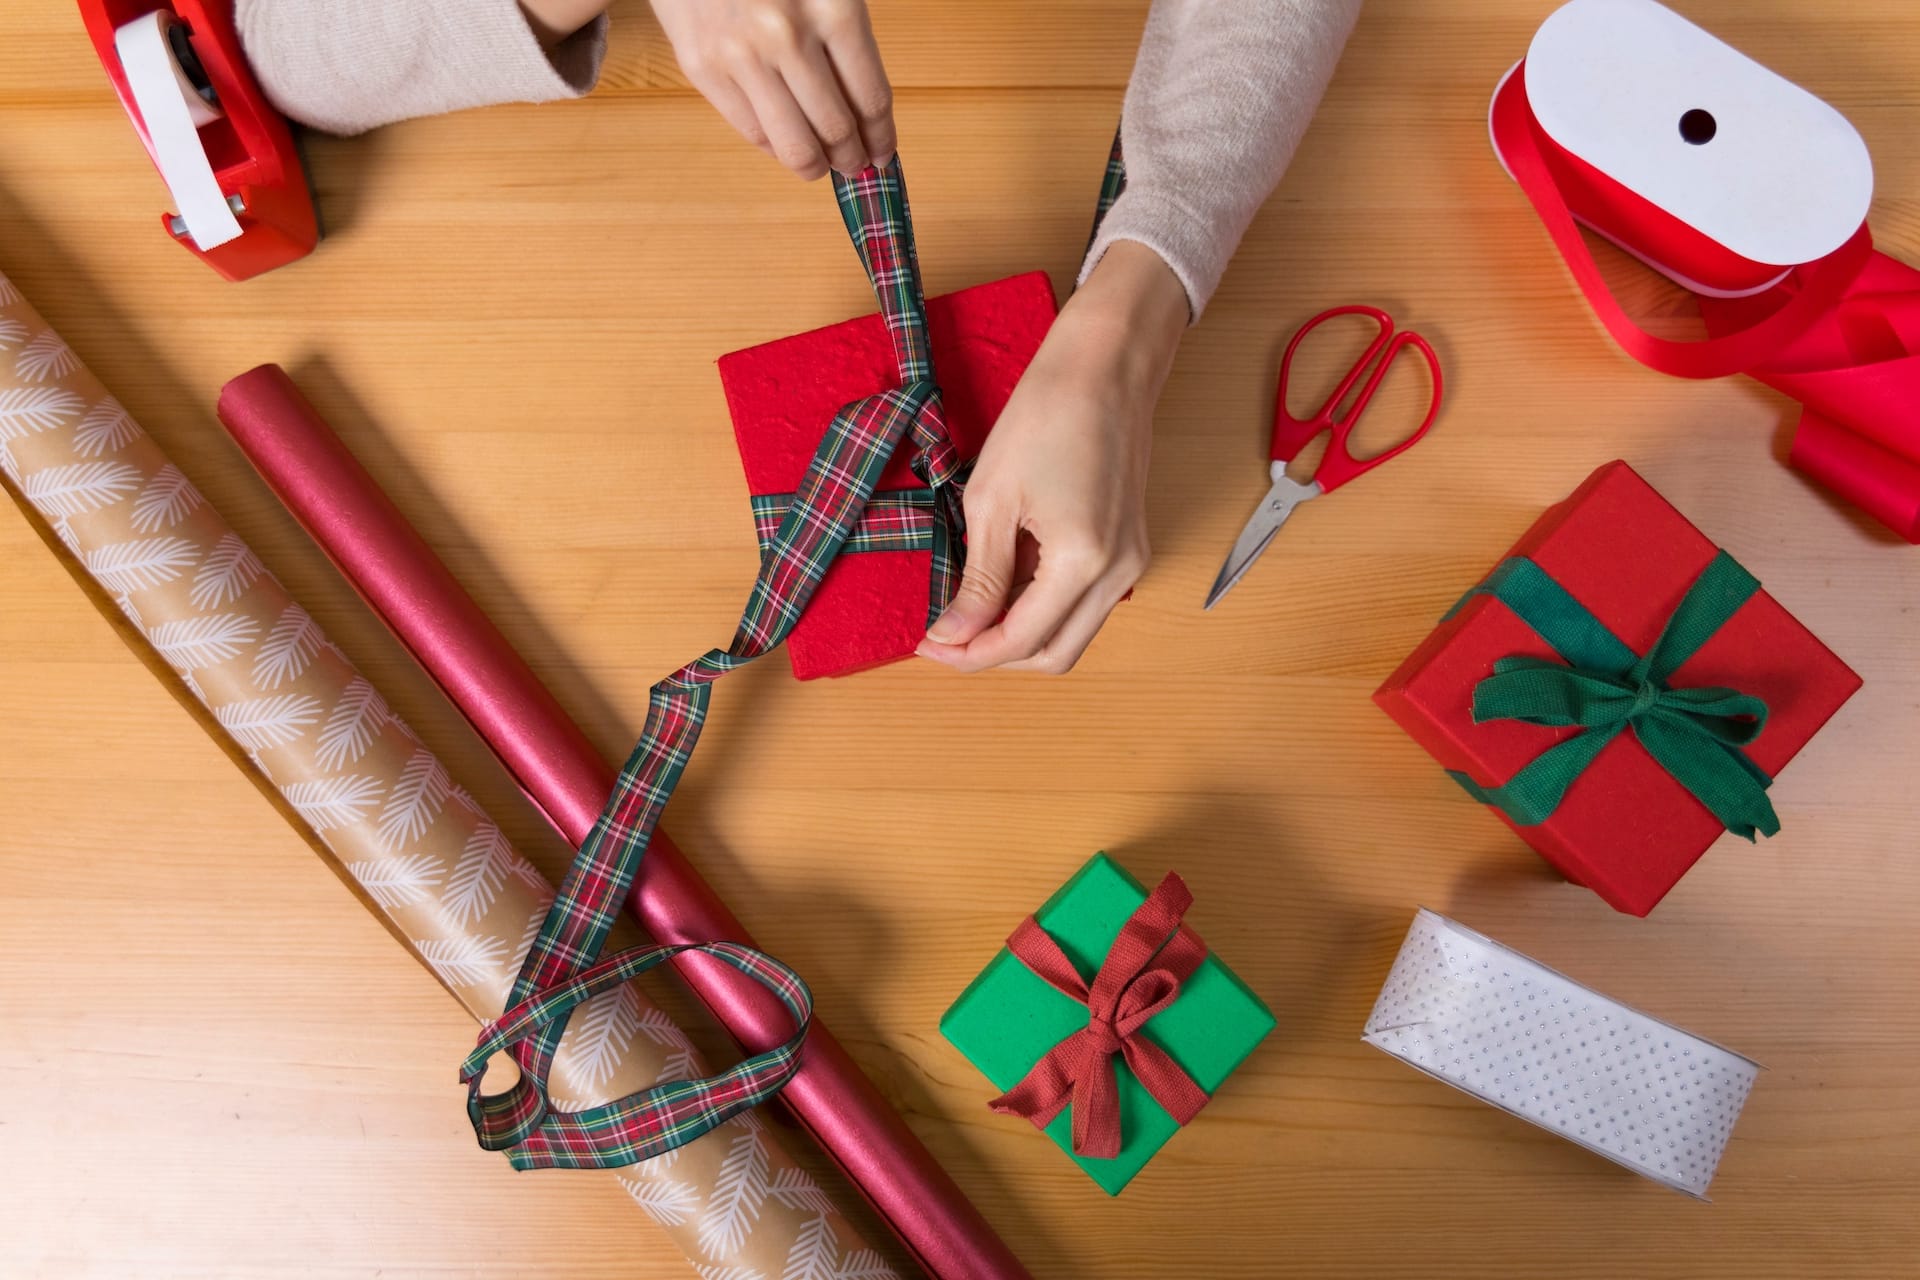 Women's hands prepare boxed gifts for the holiday season. 